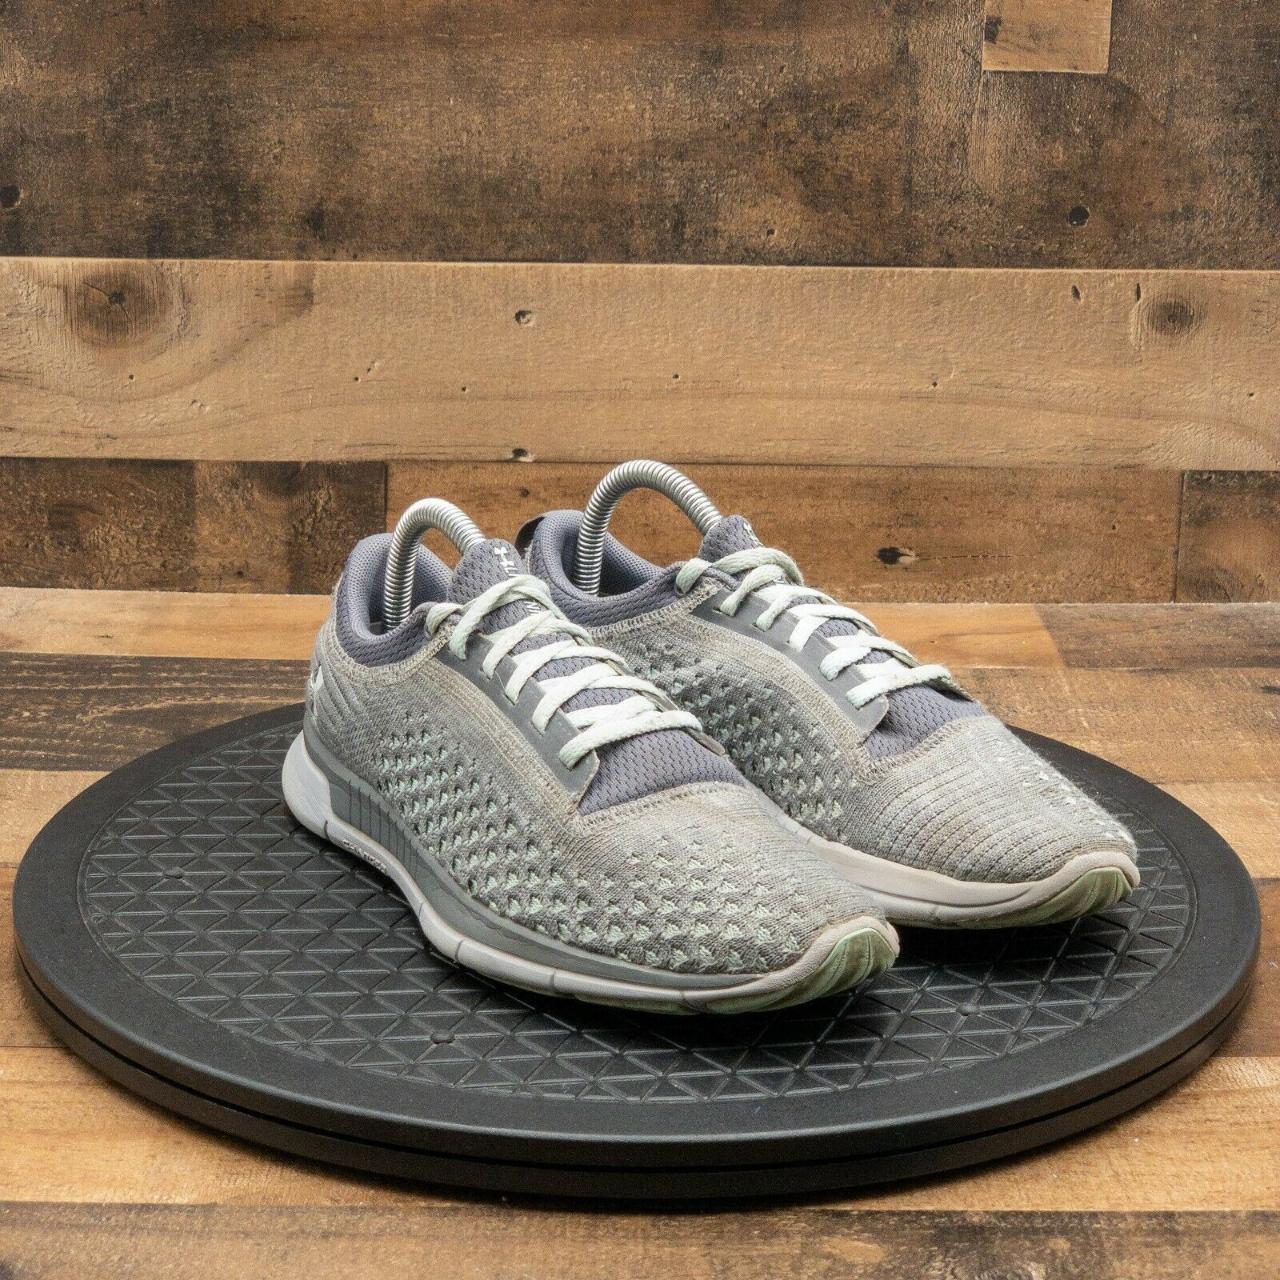 Under Armour Women's Grey Trainers